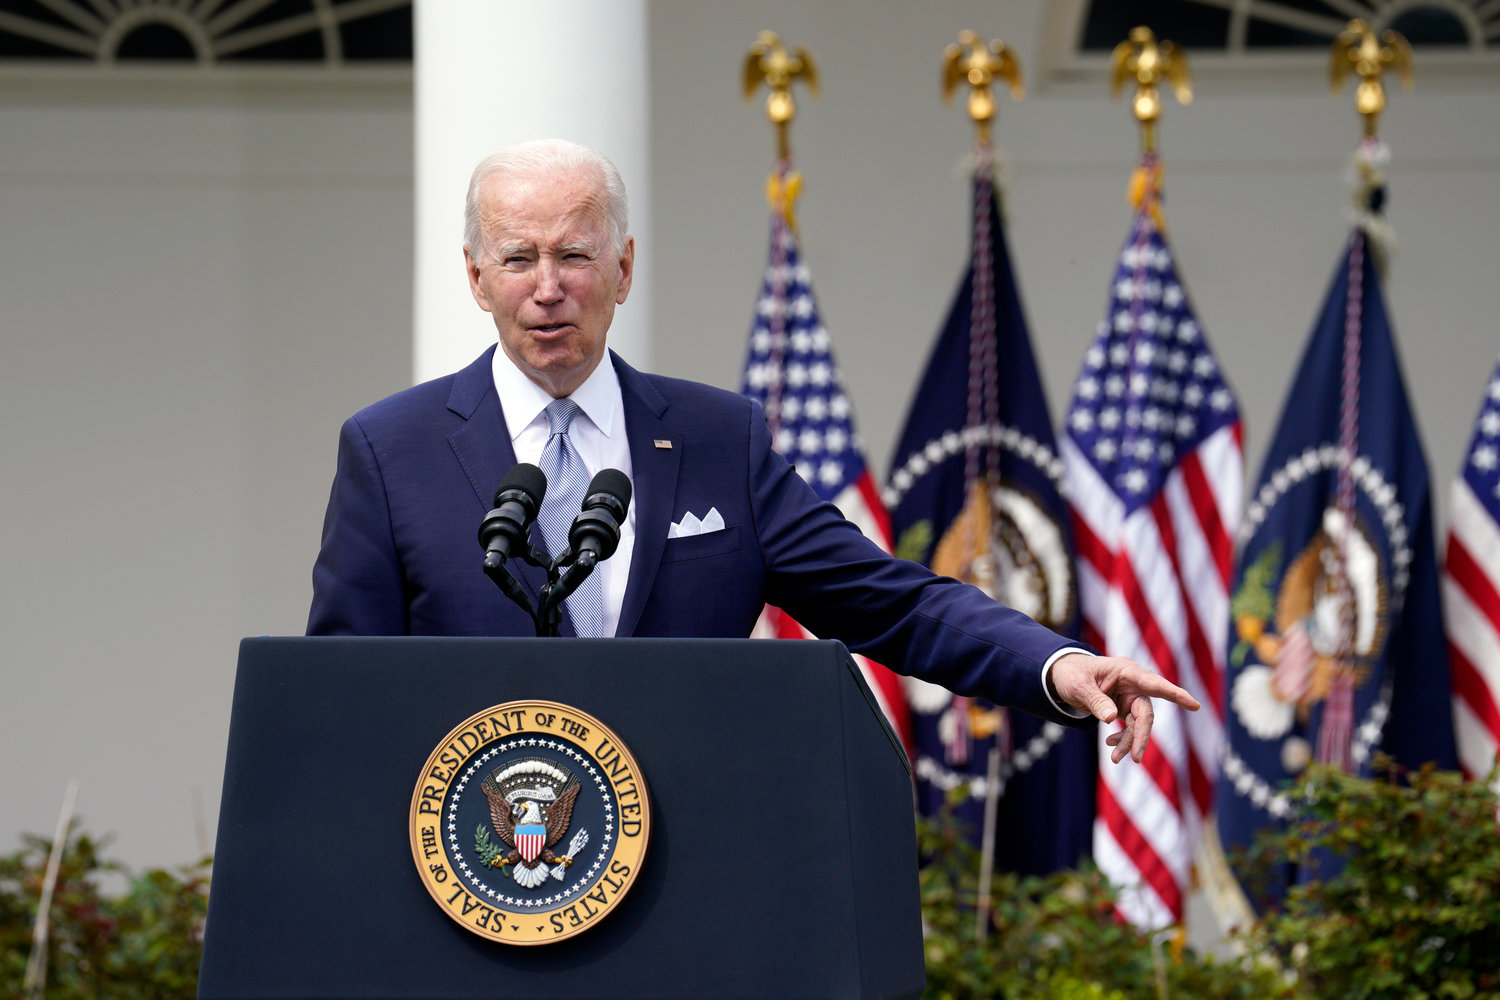 U.S. President Joe Biden delivers remarks on the Ghost Guns Rule in the Rose Garden at the White House in Washington, D.C., on Monday, April 11, 2022. (Yuri Gripas/Abaca Press/TNS)